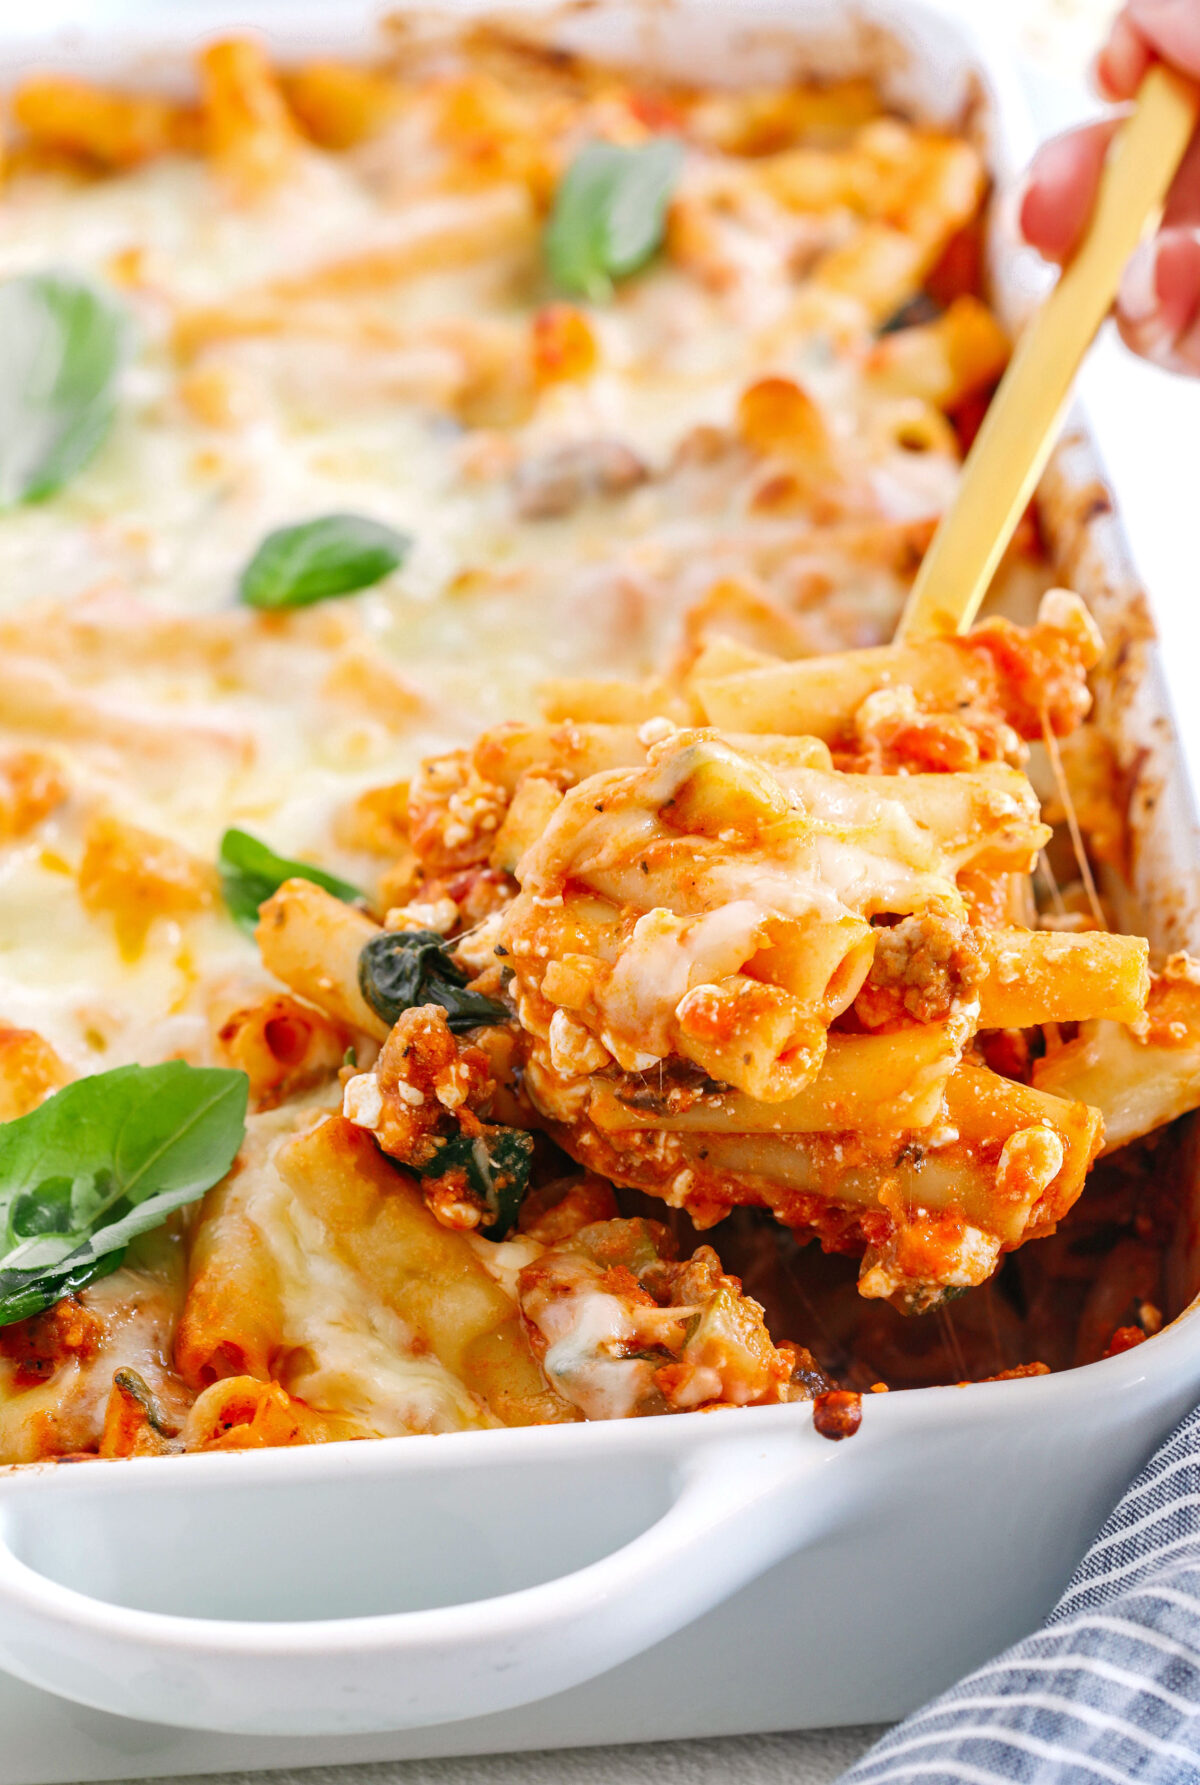 Comforting and delicious Healthy Baked Ziti packed with veggies, flavorful turkey sausage and makes the perfect weeknight meal the whole family will love!  Leftovers guaranteed!